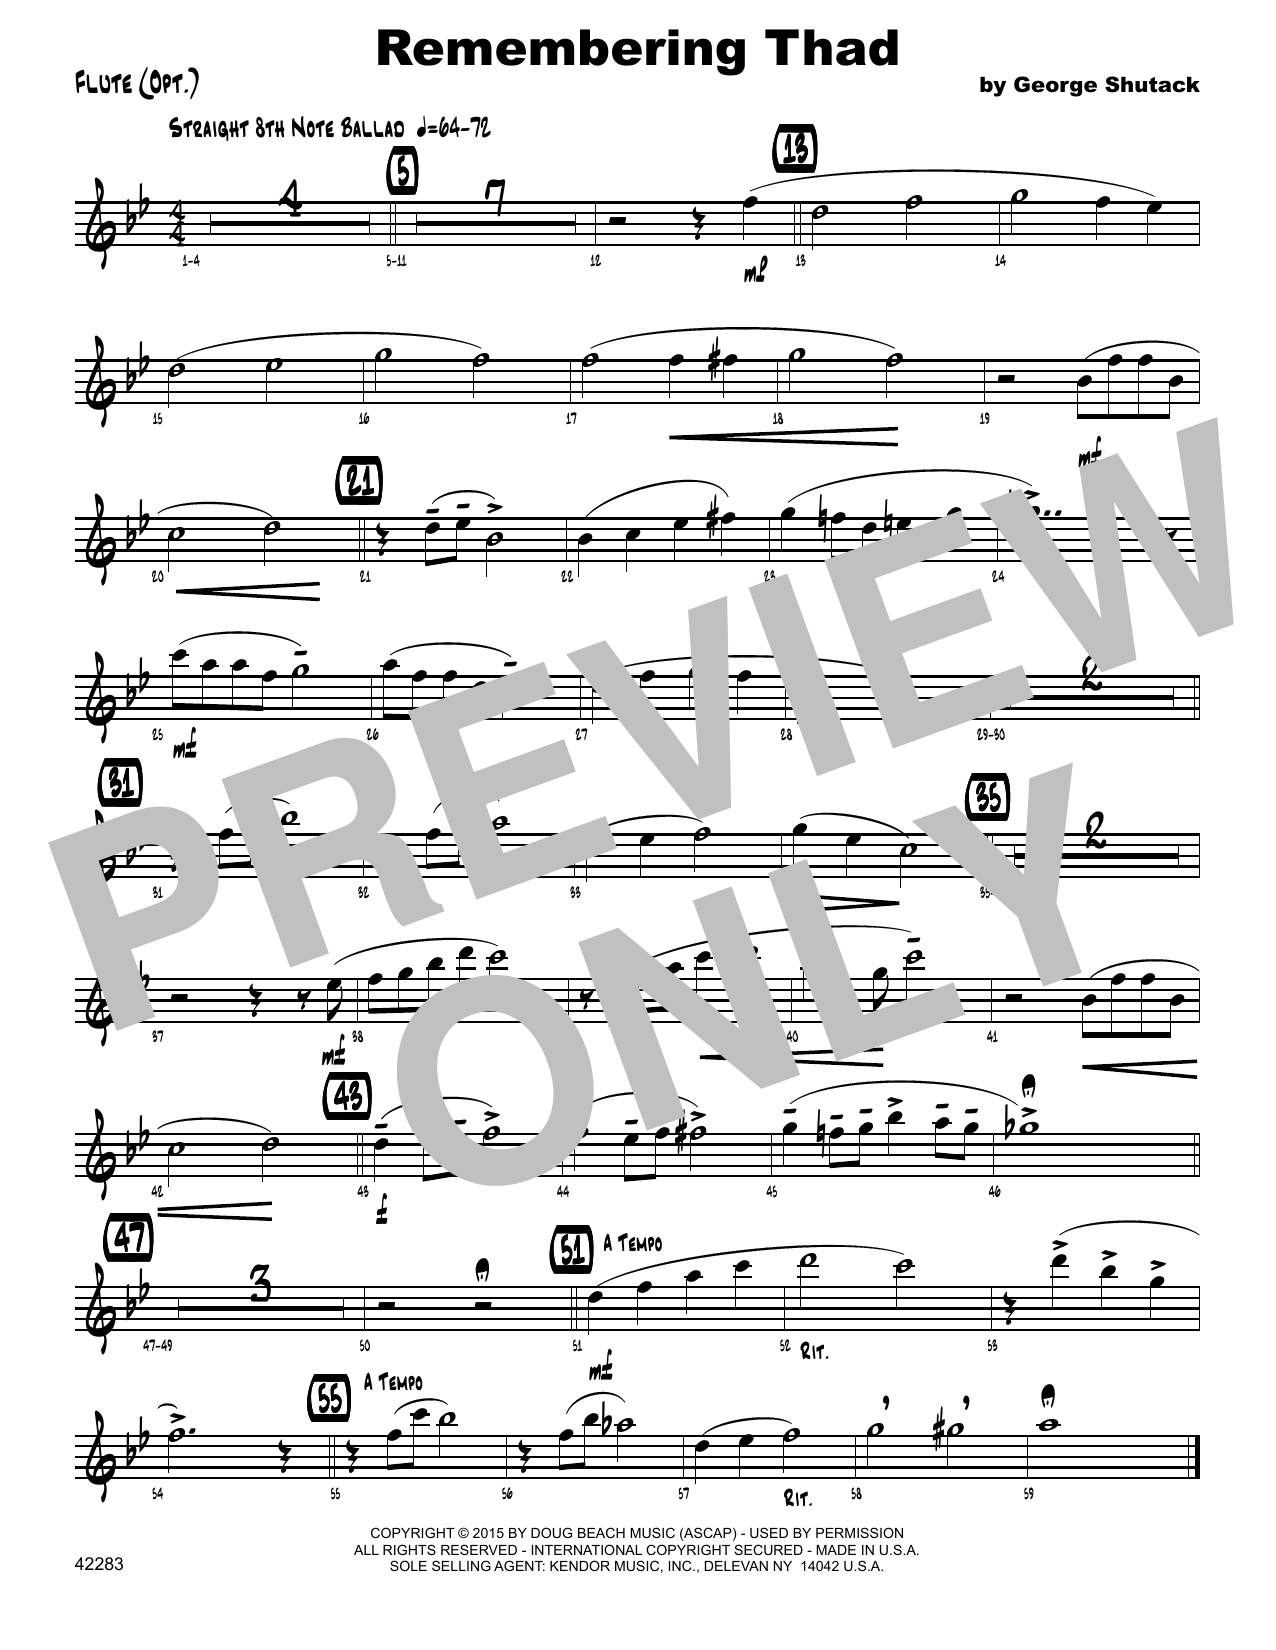 Download George Shutack Remembering Thad - Flute Sheet Music